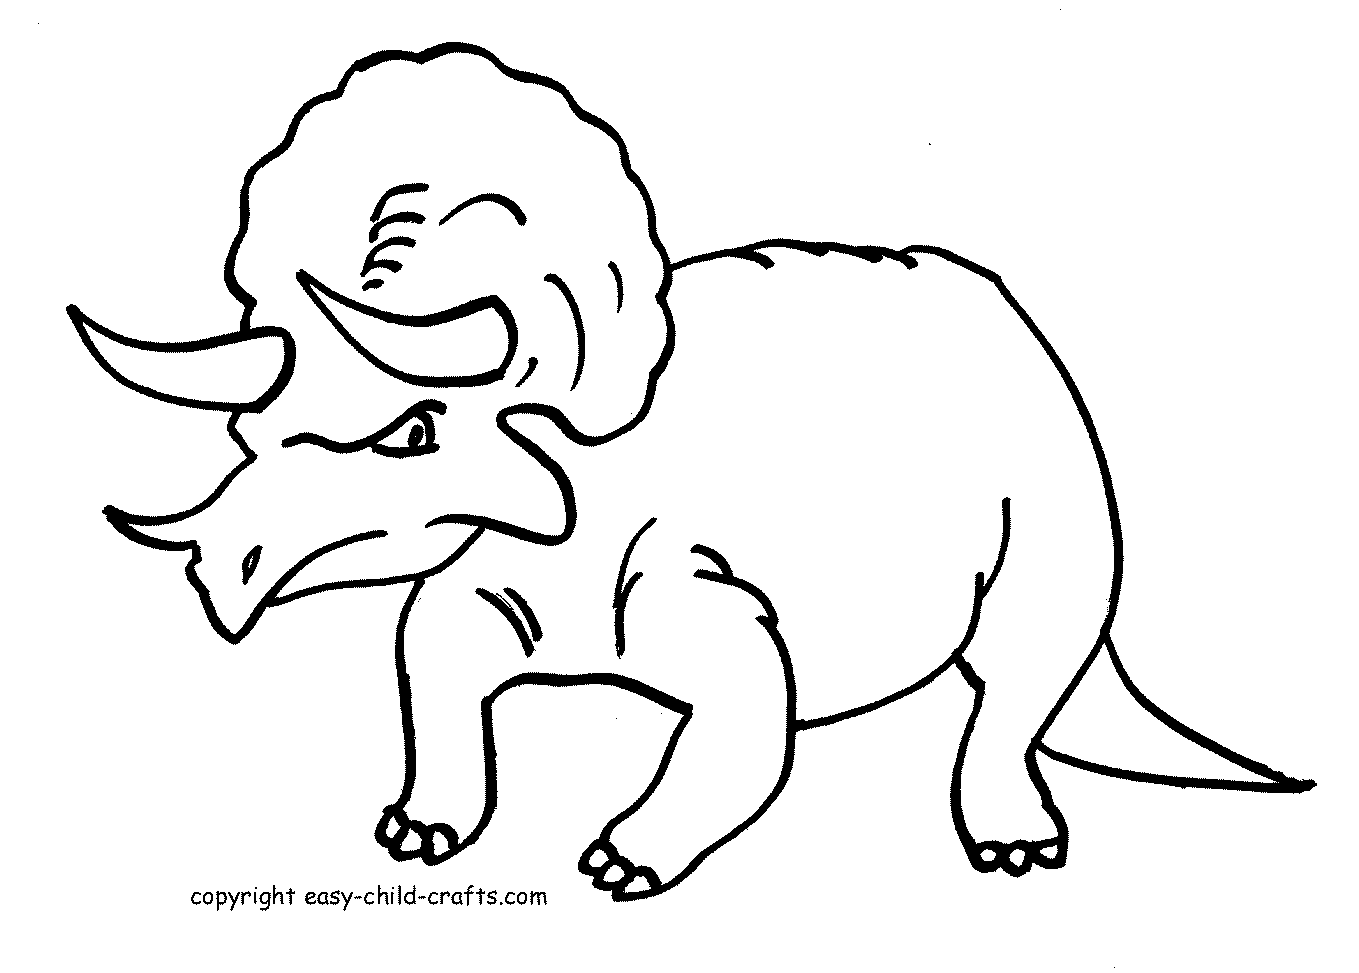 Coloring Pages: Dinosaur Coloring Pages Collections